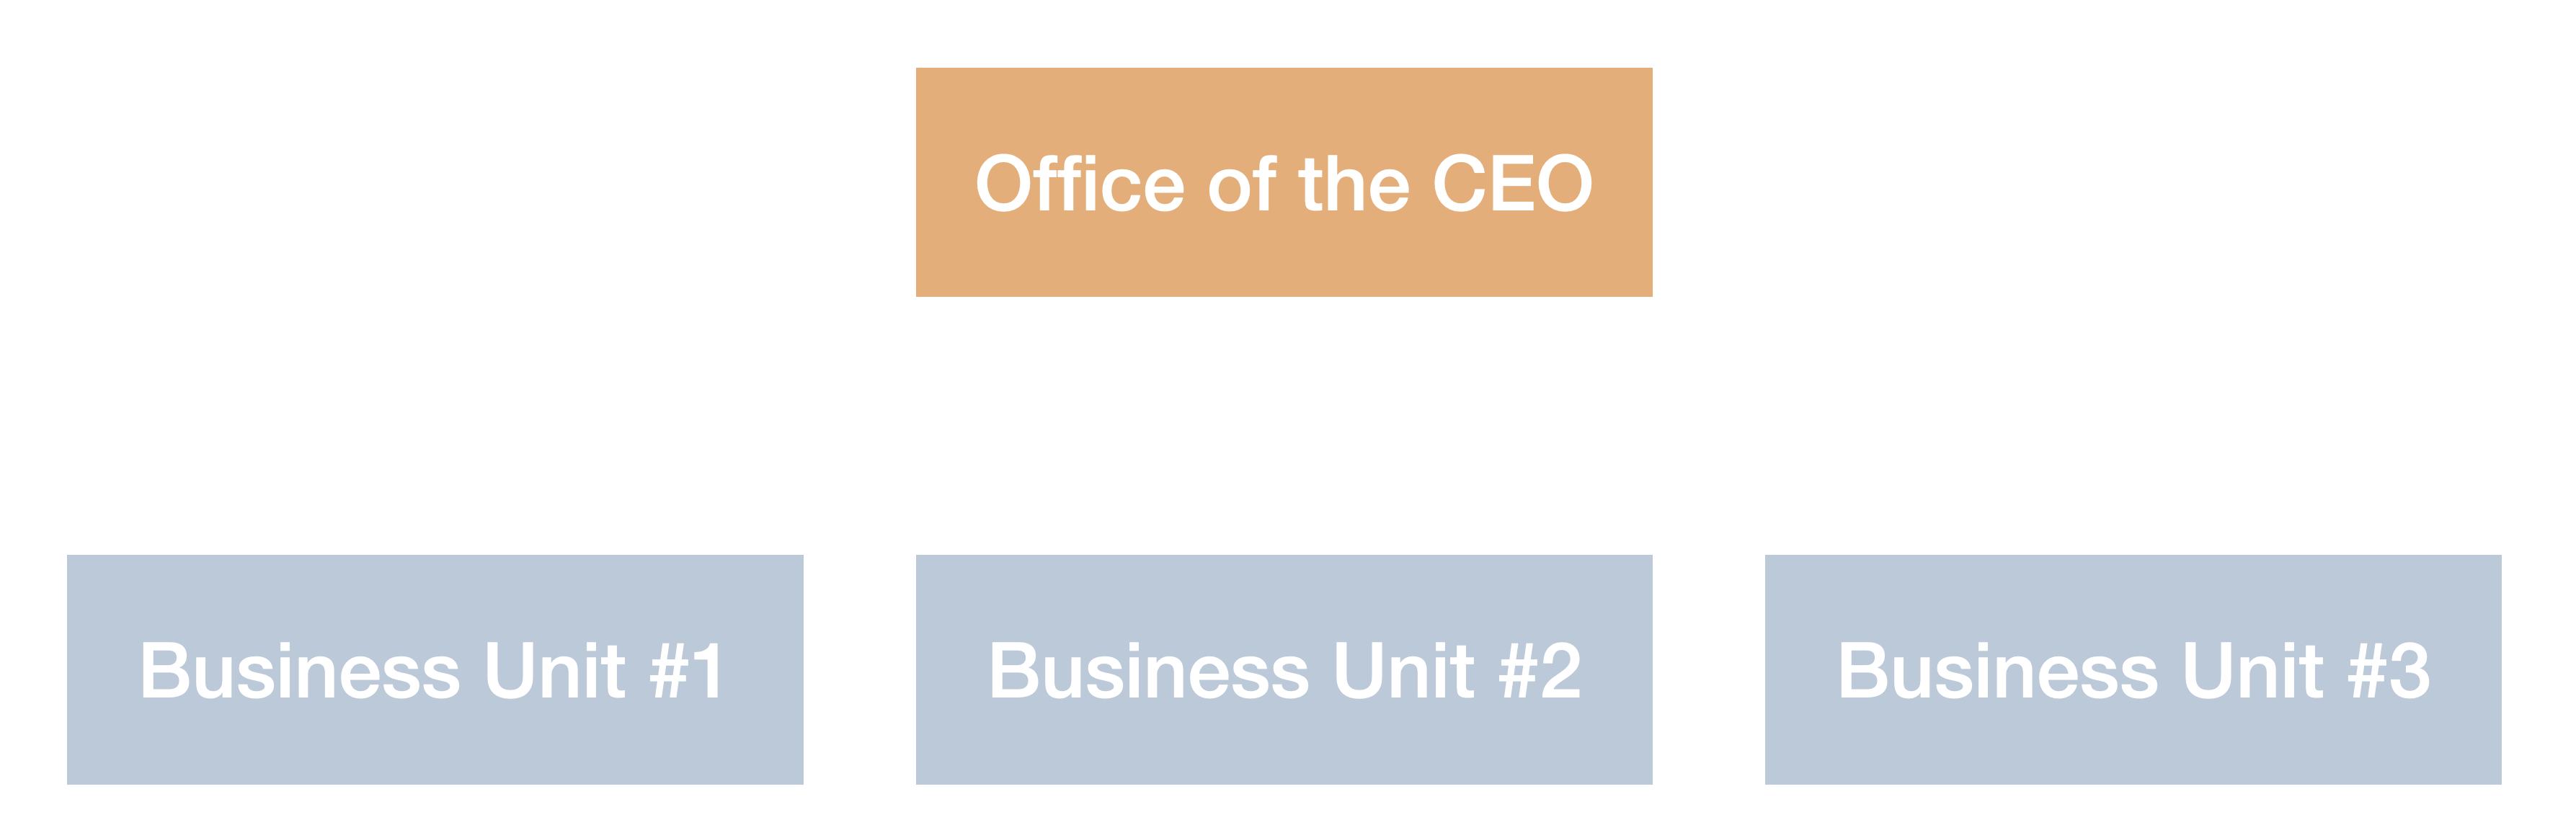 “organizational chart of a large software company with an office of the CEO & multiple business units”